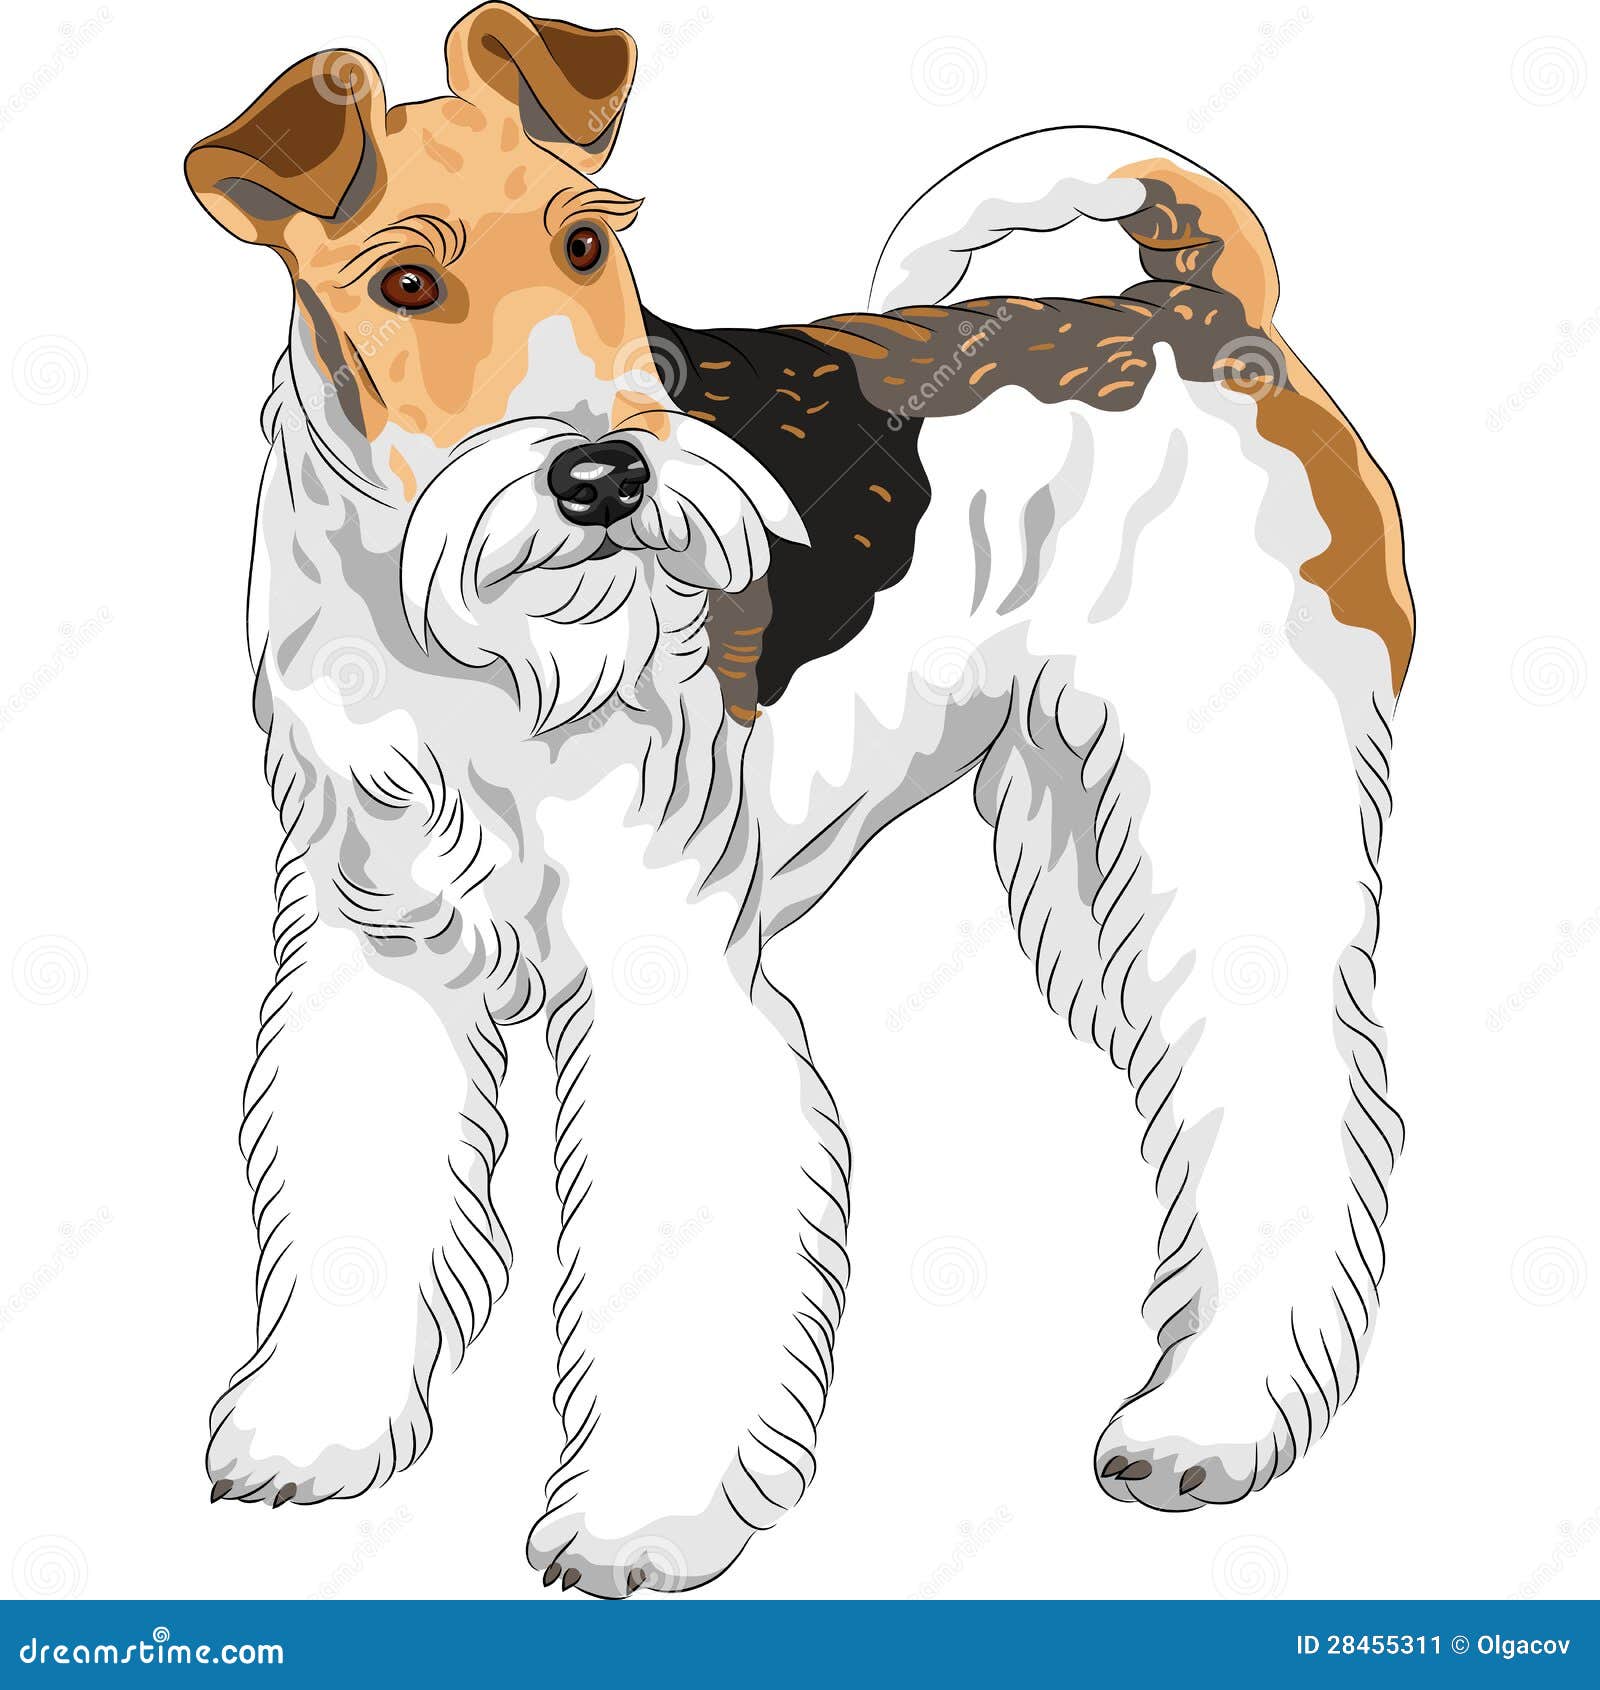 Download Sketch Dog Wire Fox Terrier Breed Standing Stock Image - Image: 28455311